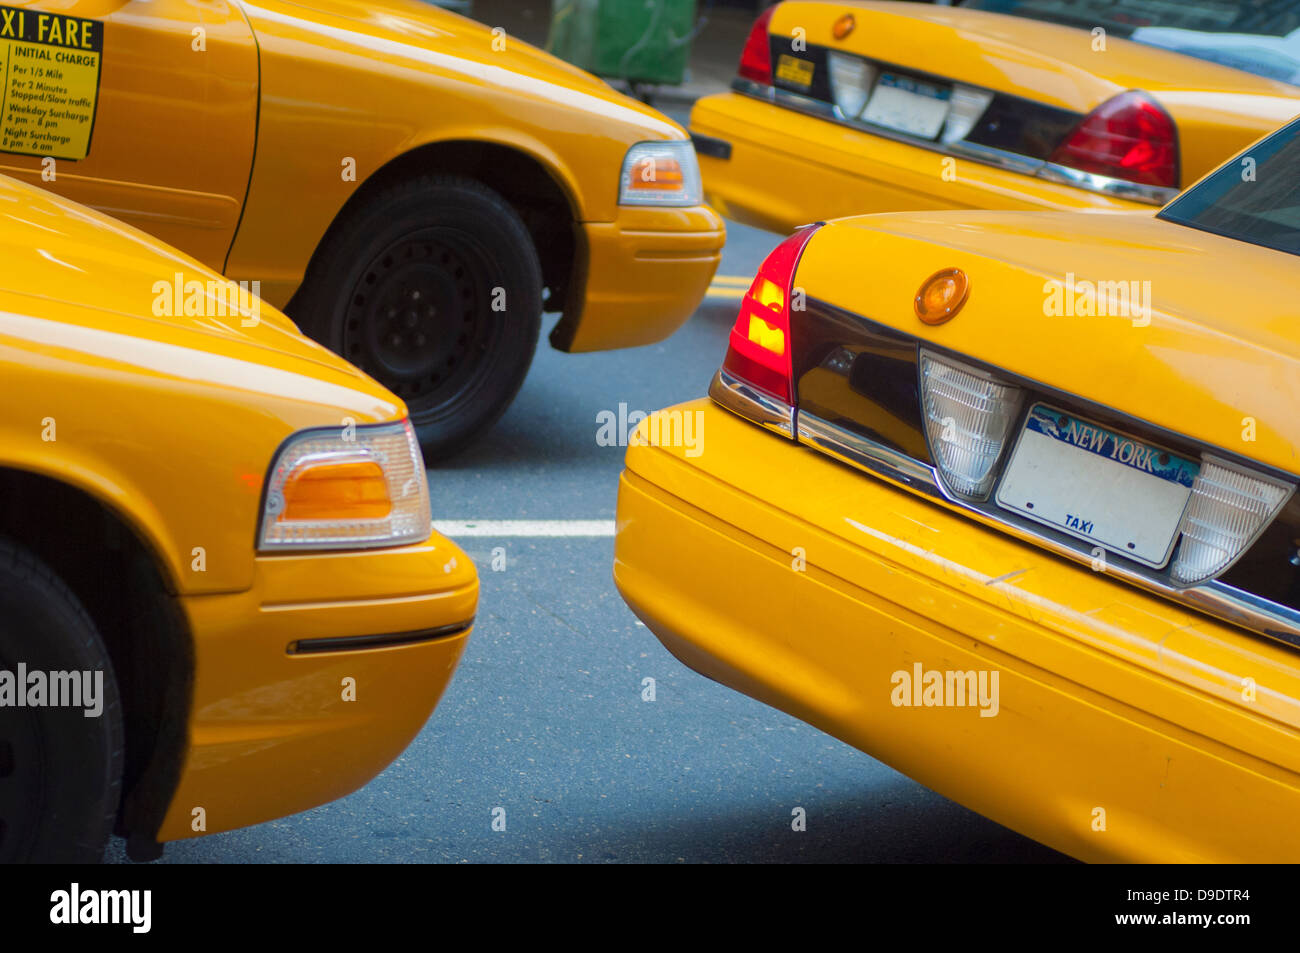 Taxicabs in New York City, USA Stock Photo